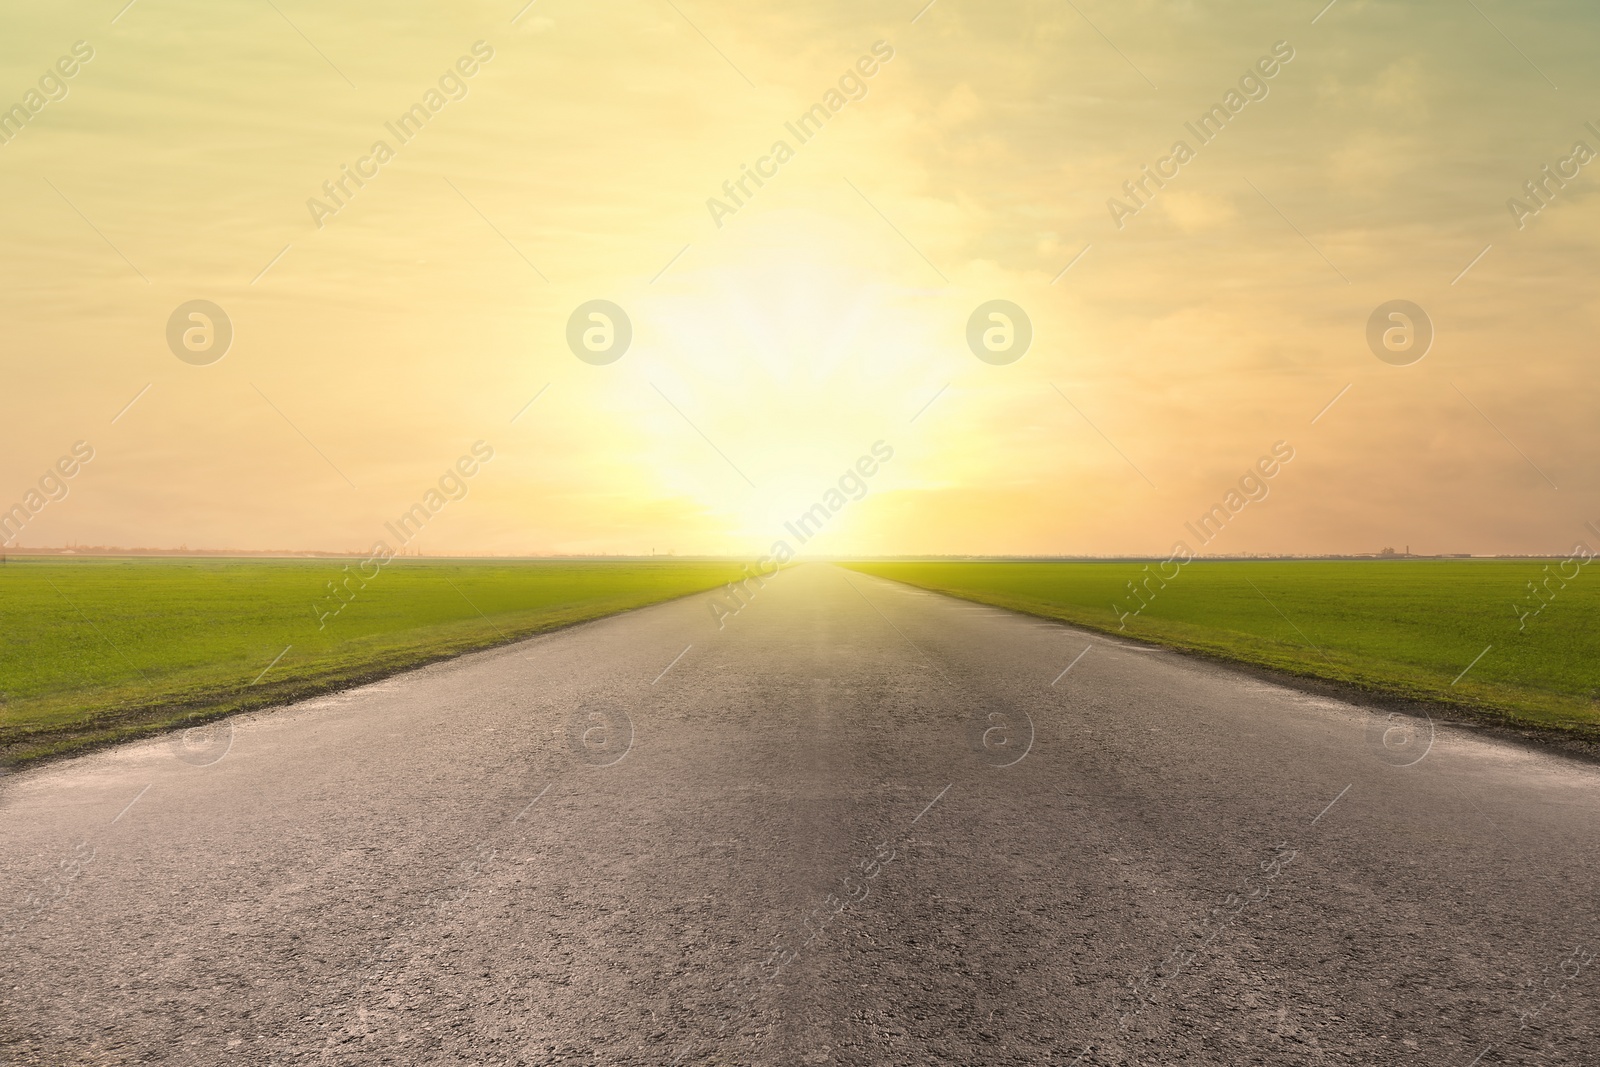 Image of Road trip. Beautiful view of asphalt highway at sunset 